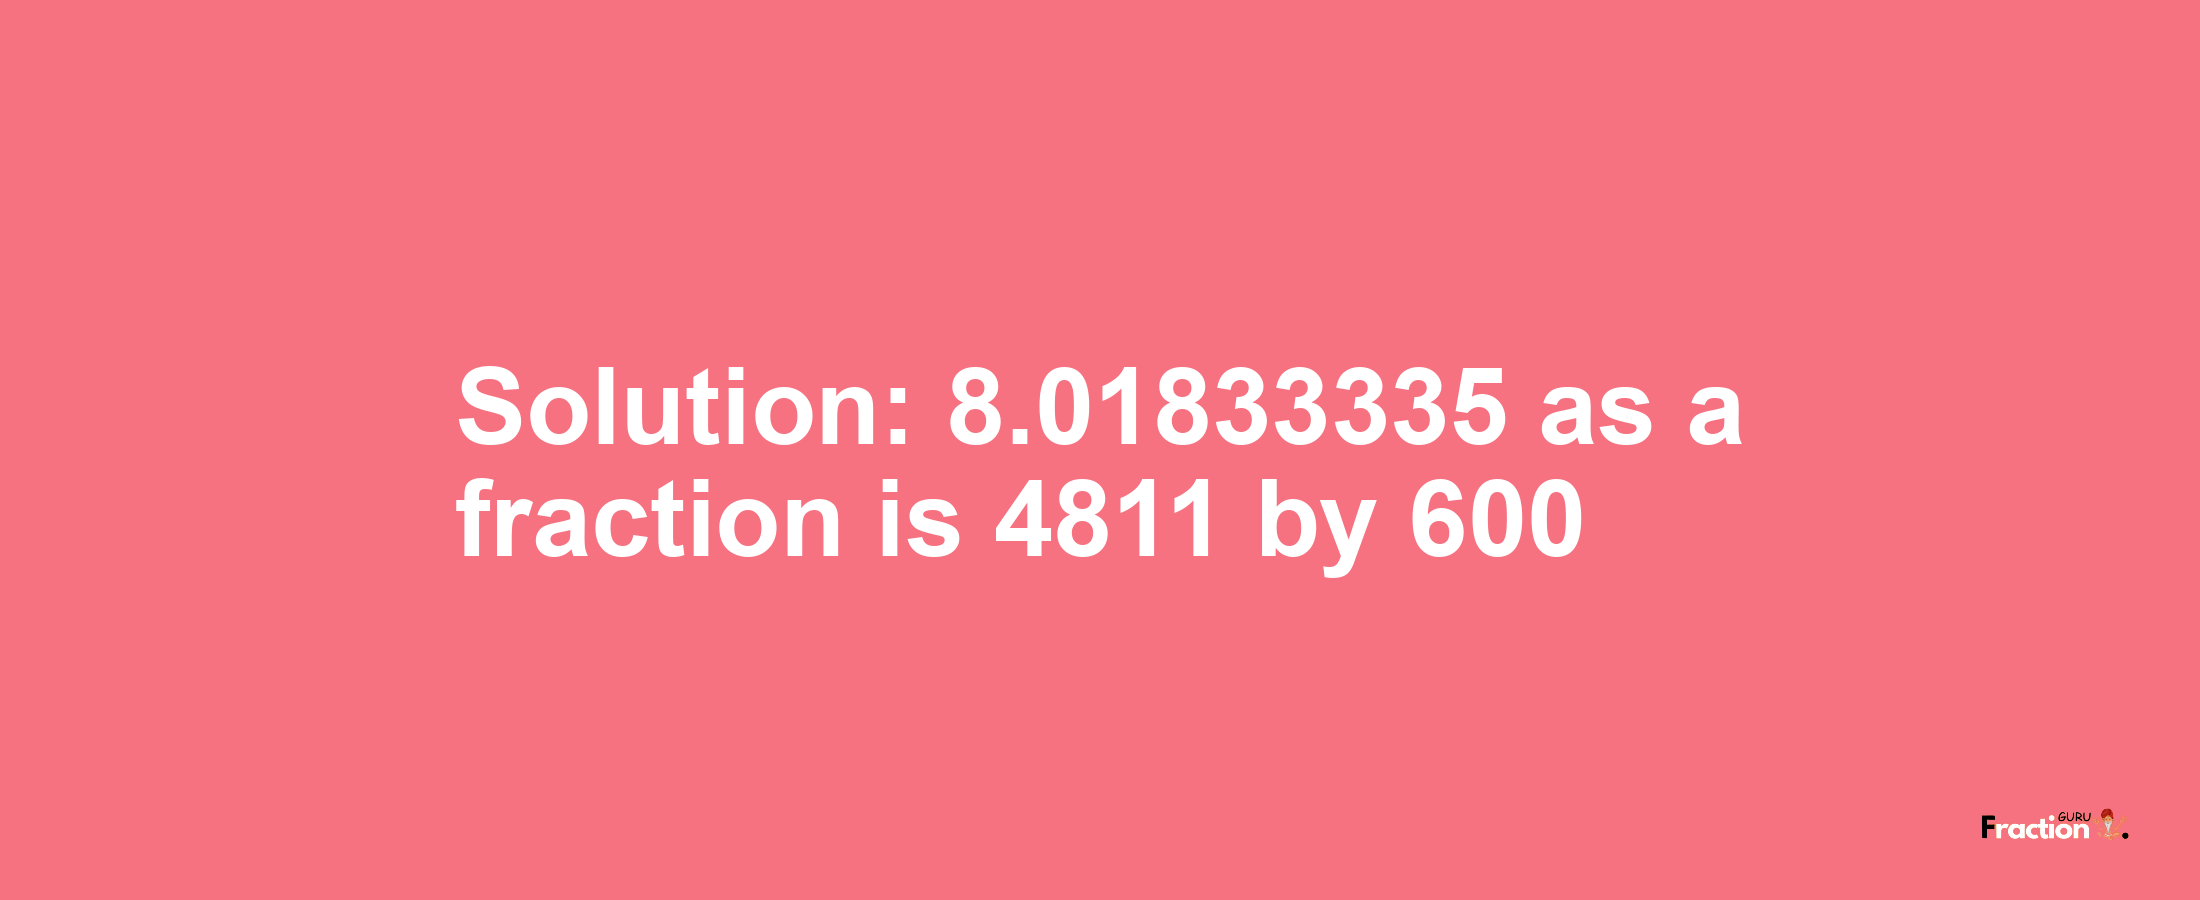 Solution:8.01833335 as a fraction is 4811/600